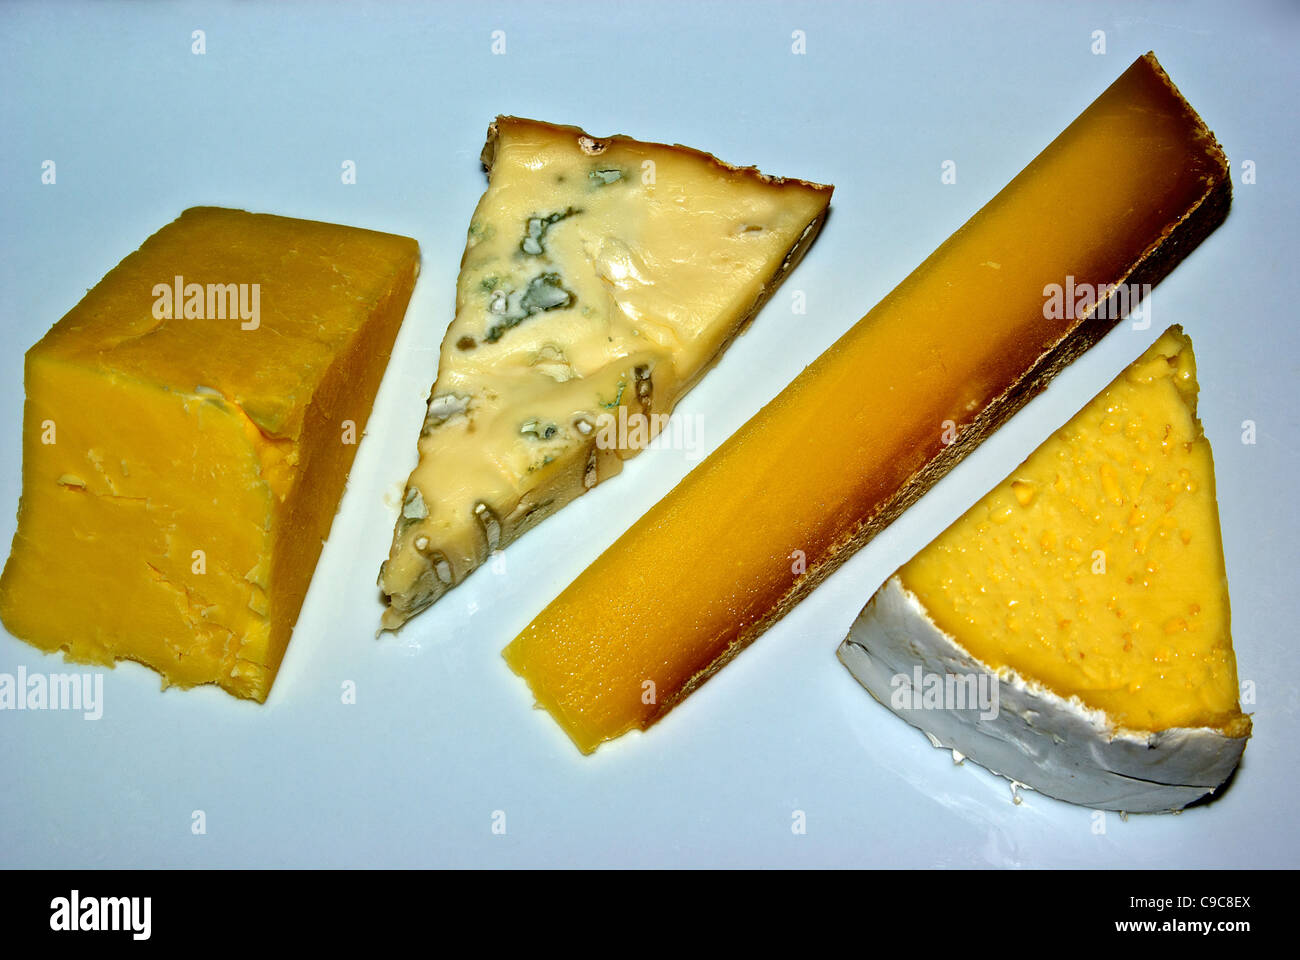 Wedges aged New Zealand cheddar, hard French, and ripe soft Italian gorgonzola cheeses on plate Stock Photo